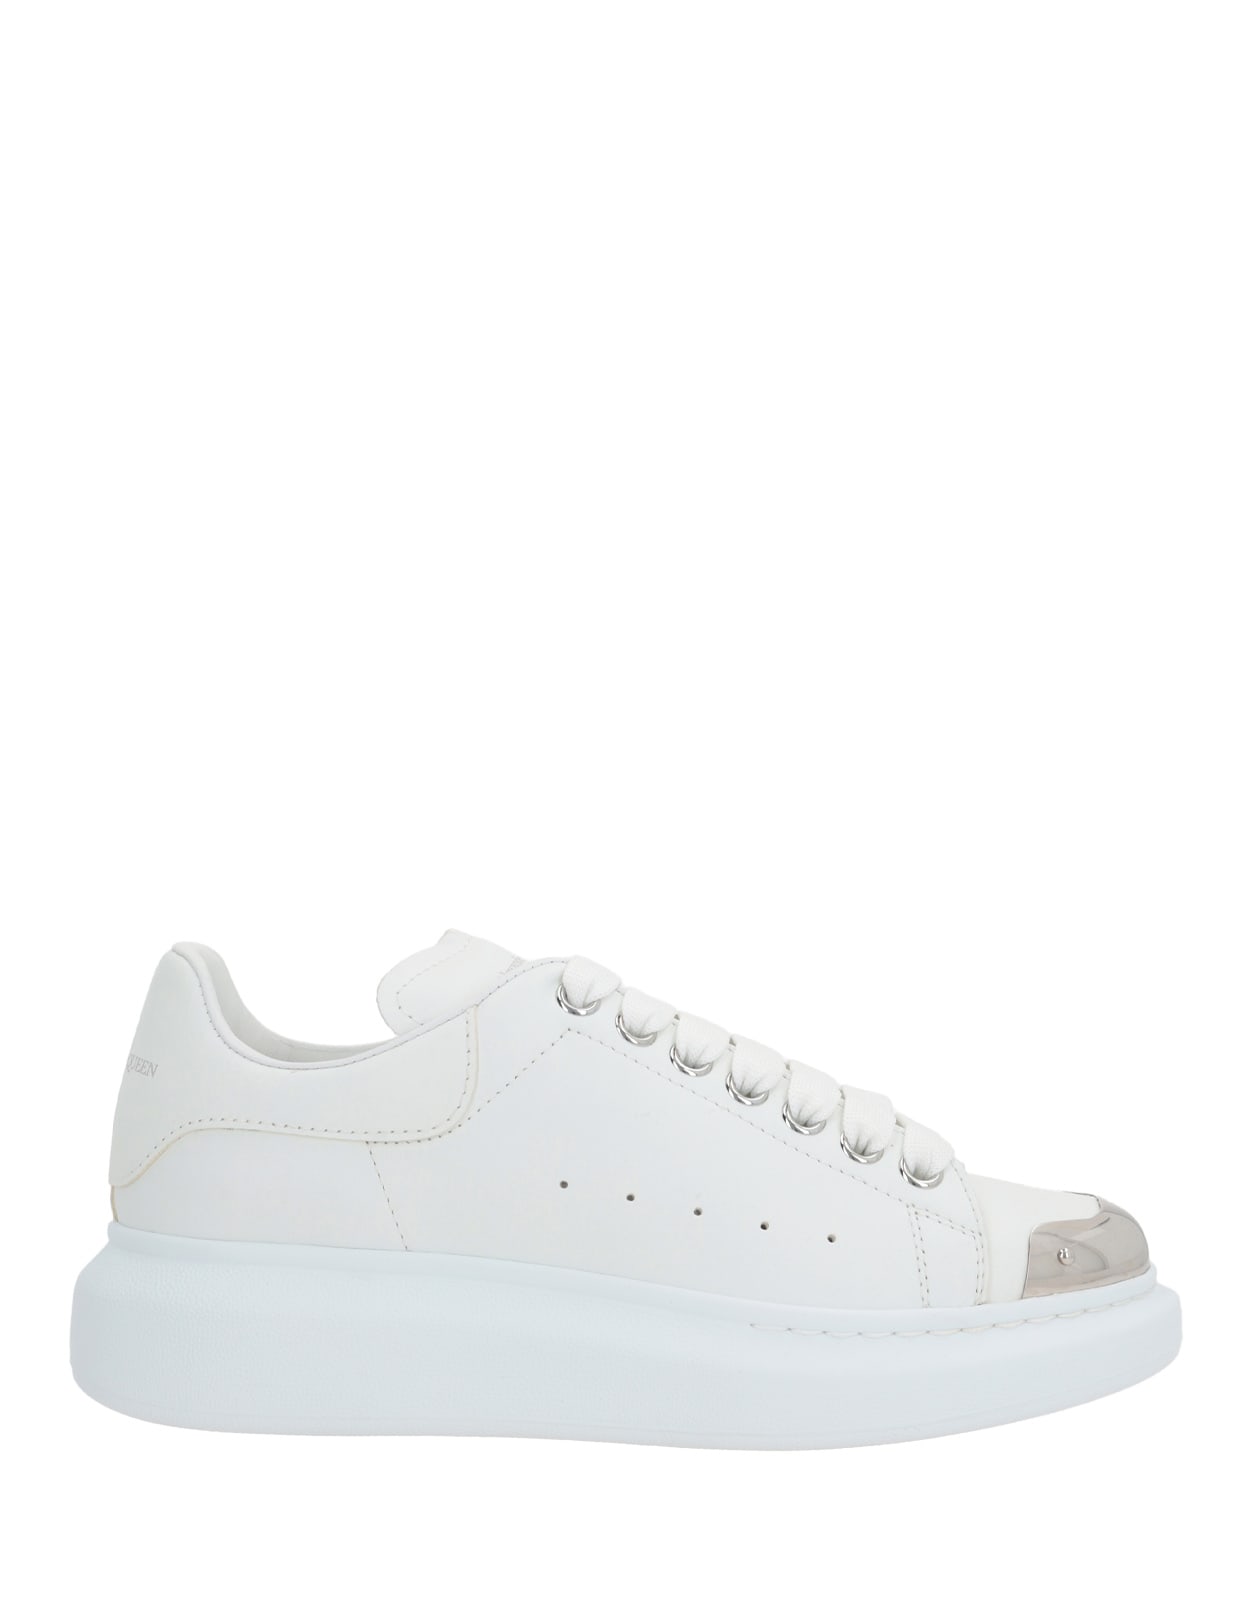 ALEXANDER MCQUEEN WHITE OVERSIZED SNEAKERS WITH SILVER METAL TOE